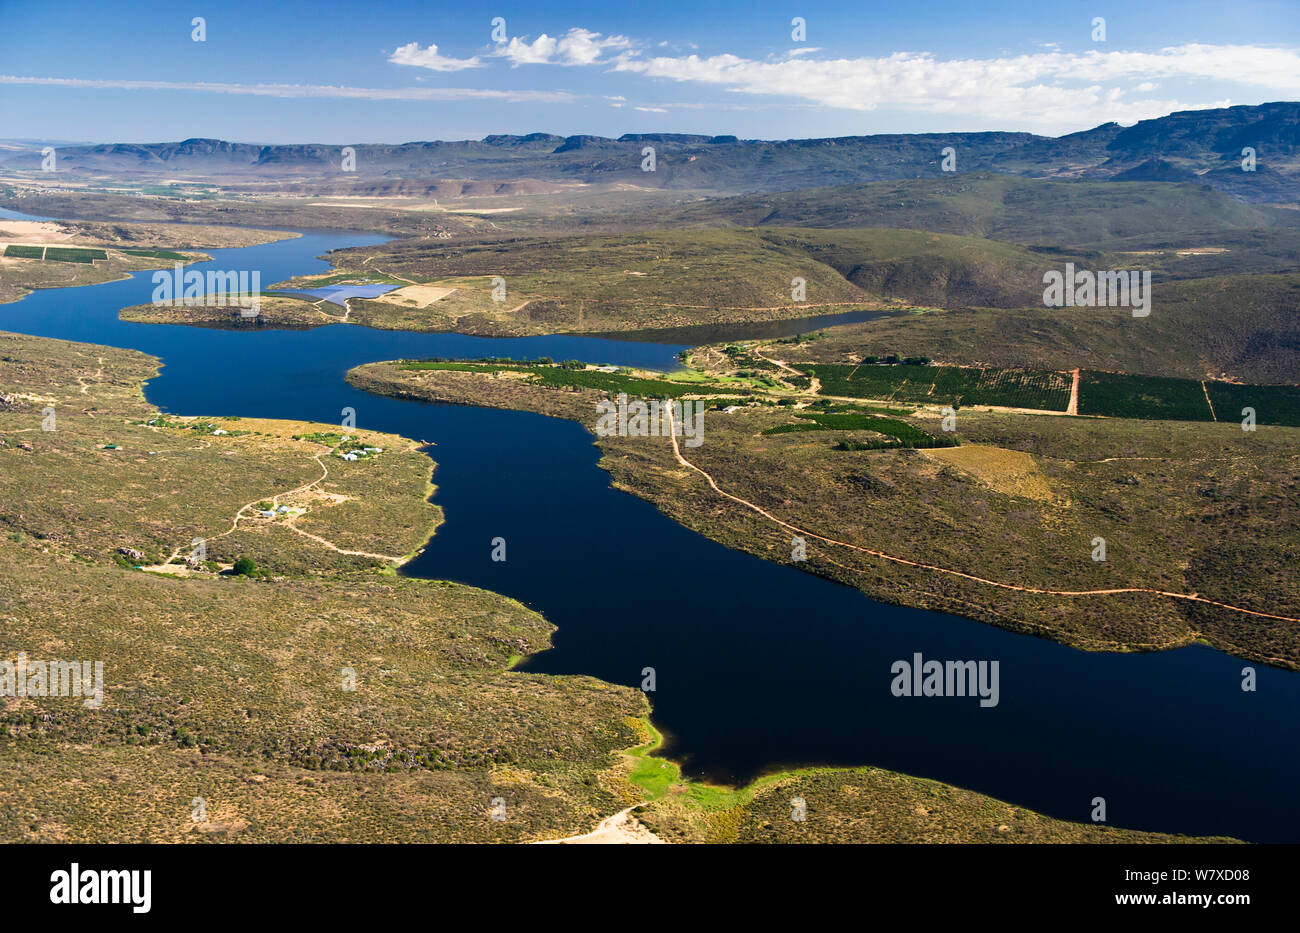 Aerial photograph of the Olifants River and the intensive agriculture along its course, a threat to the endemic fish species found here. Citrusdal and Clanwilliam area, Western Cape, South Africa. December 2013. Stock Photo